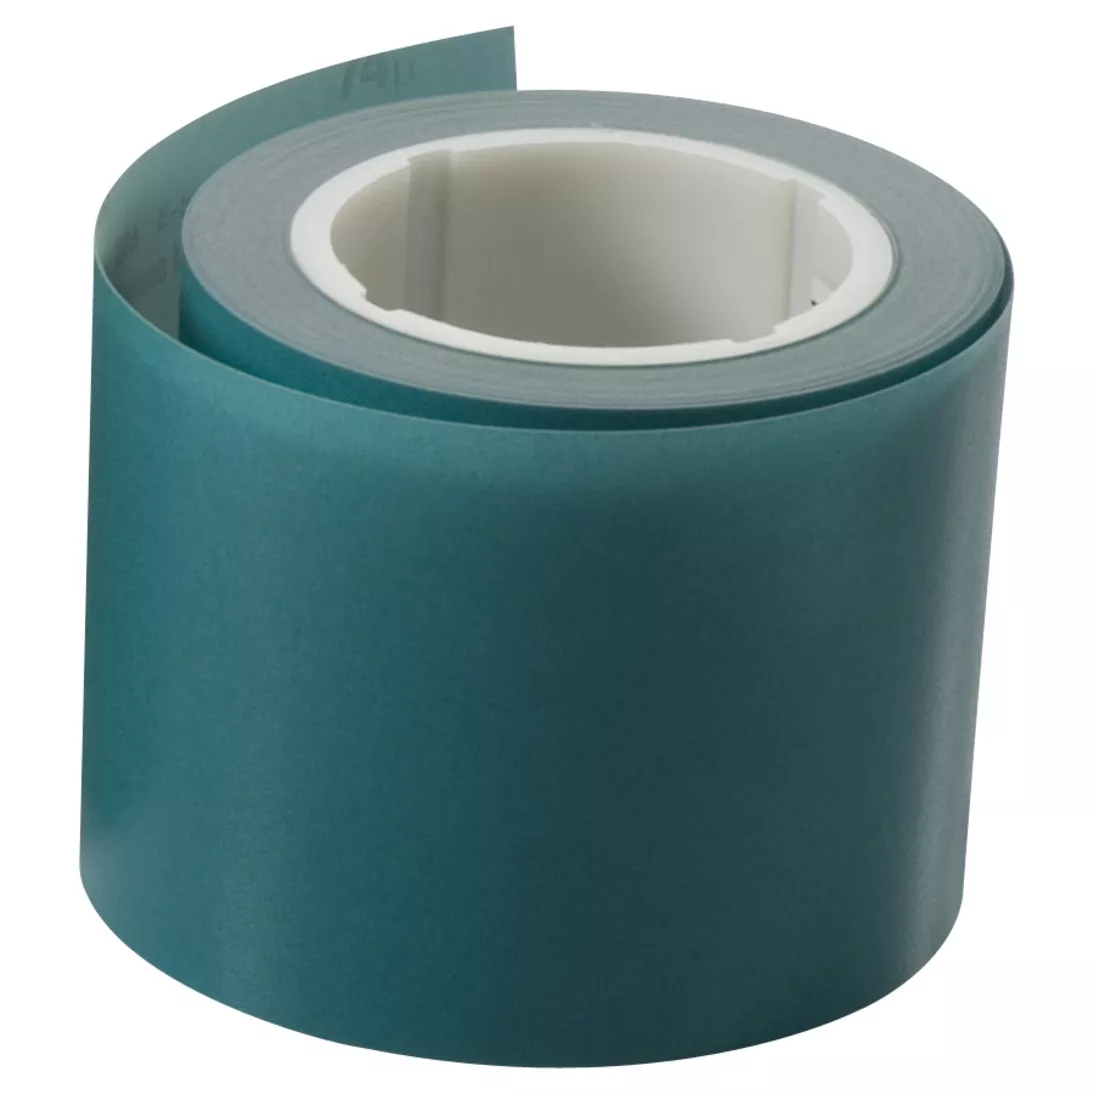 3M™ Microfinishing Film Roll 373L, .669 in x 300 ft x .787 in 30 Mic,
5MIL, ASO, Restricted